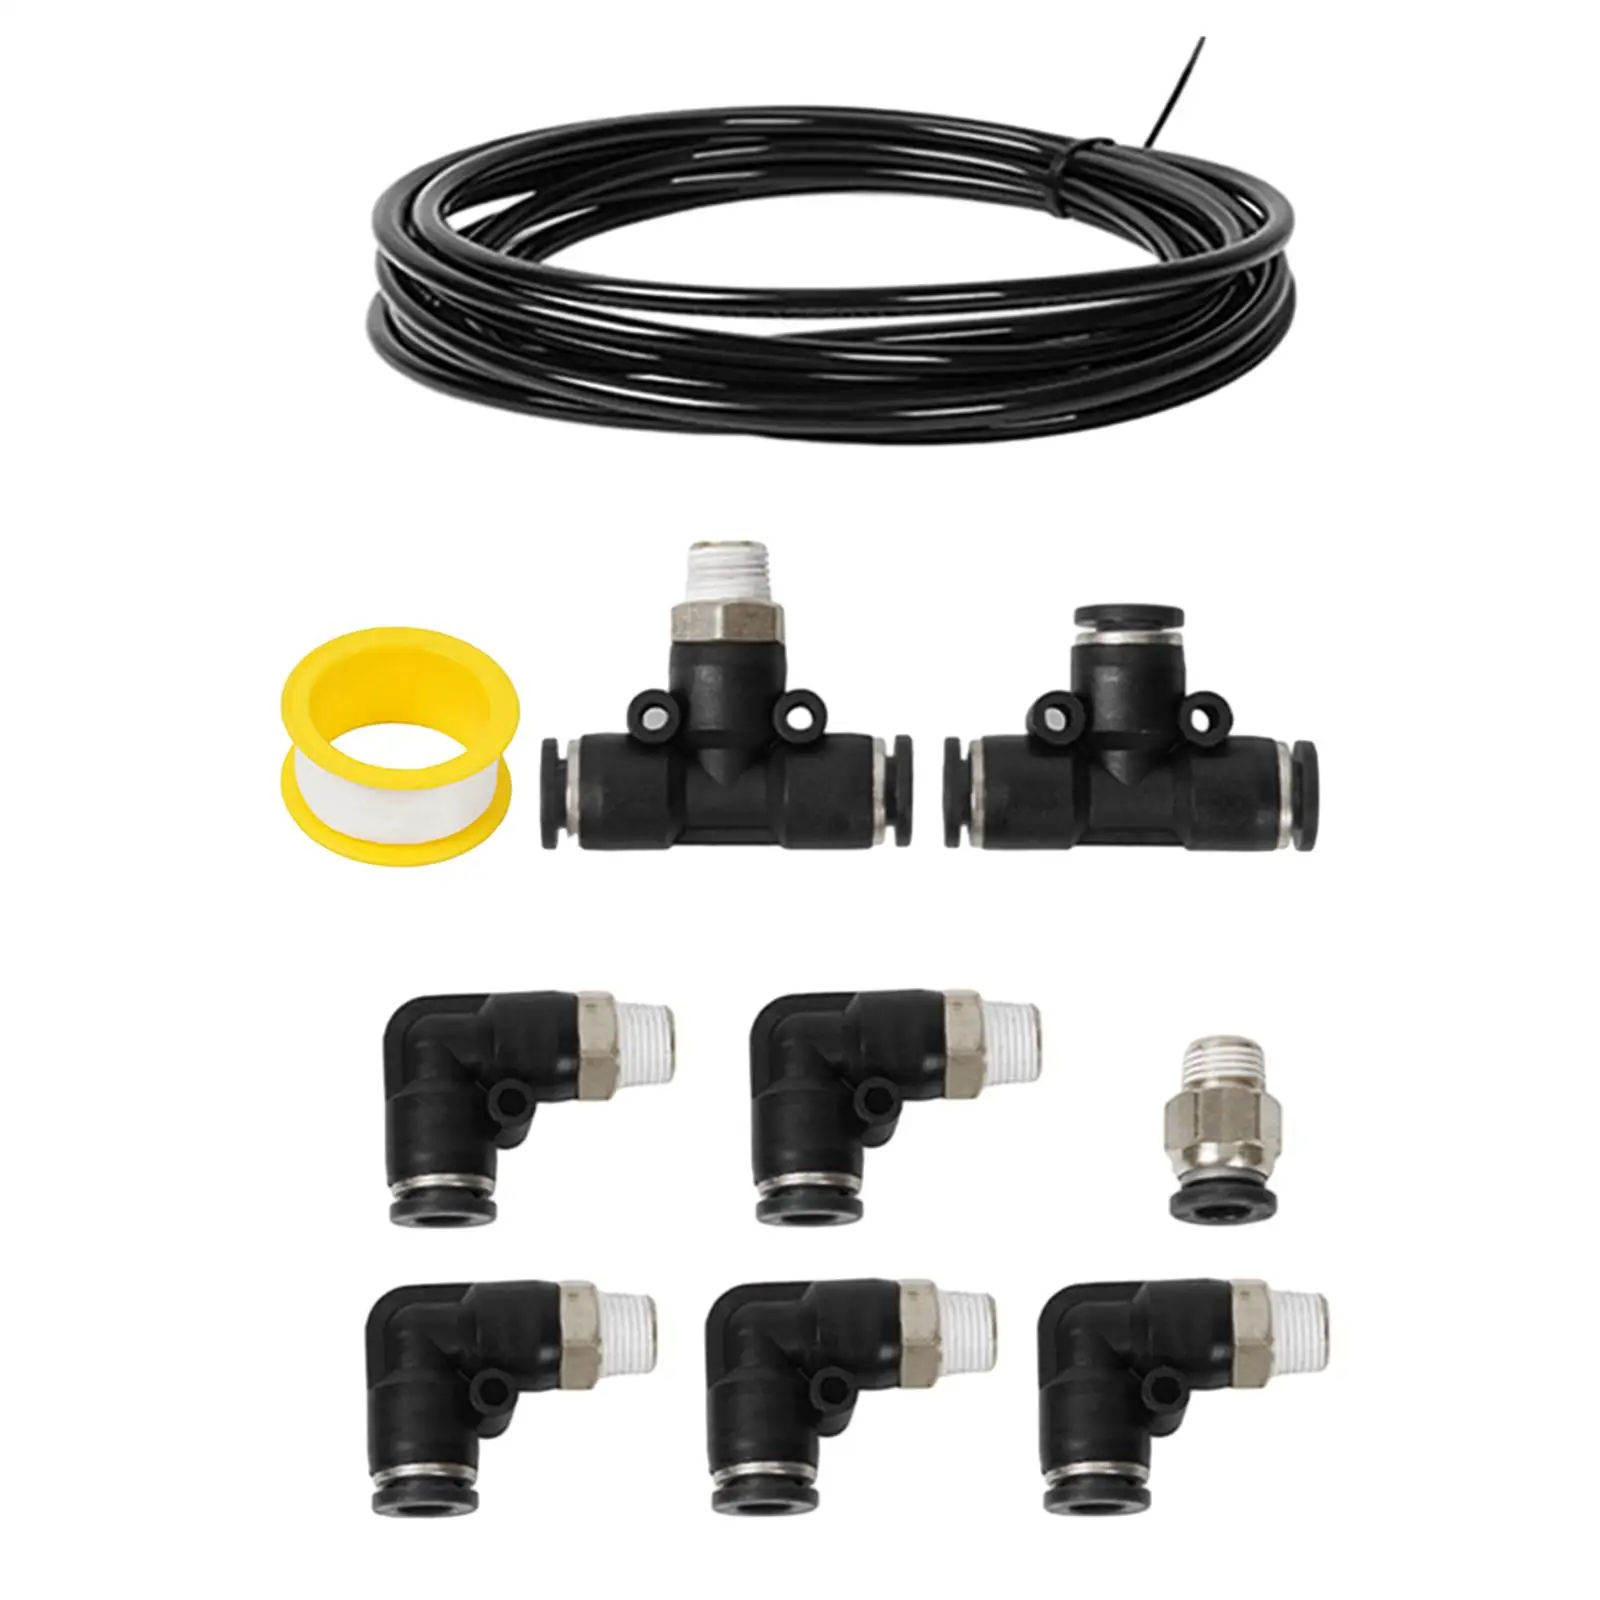 Wastegate Solenoid Connector Set Vacuum Fitting Kit for Vehicles Convenient Installation Automotive Accessories Durable Stable